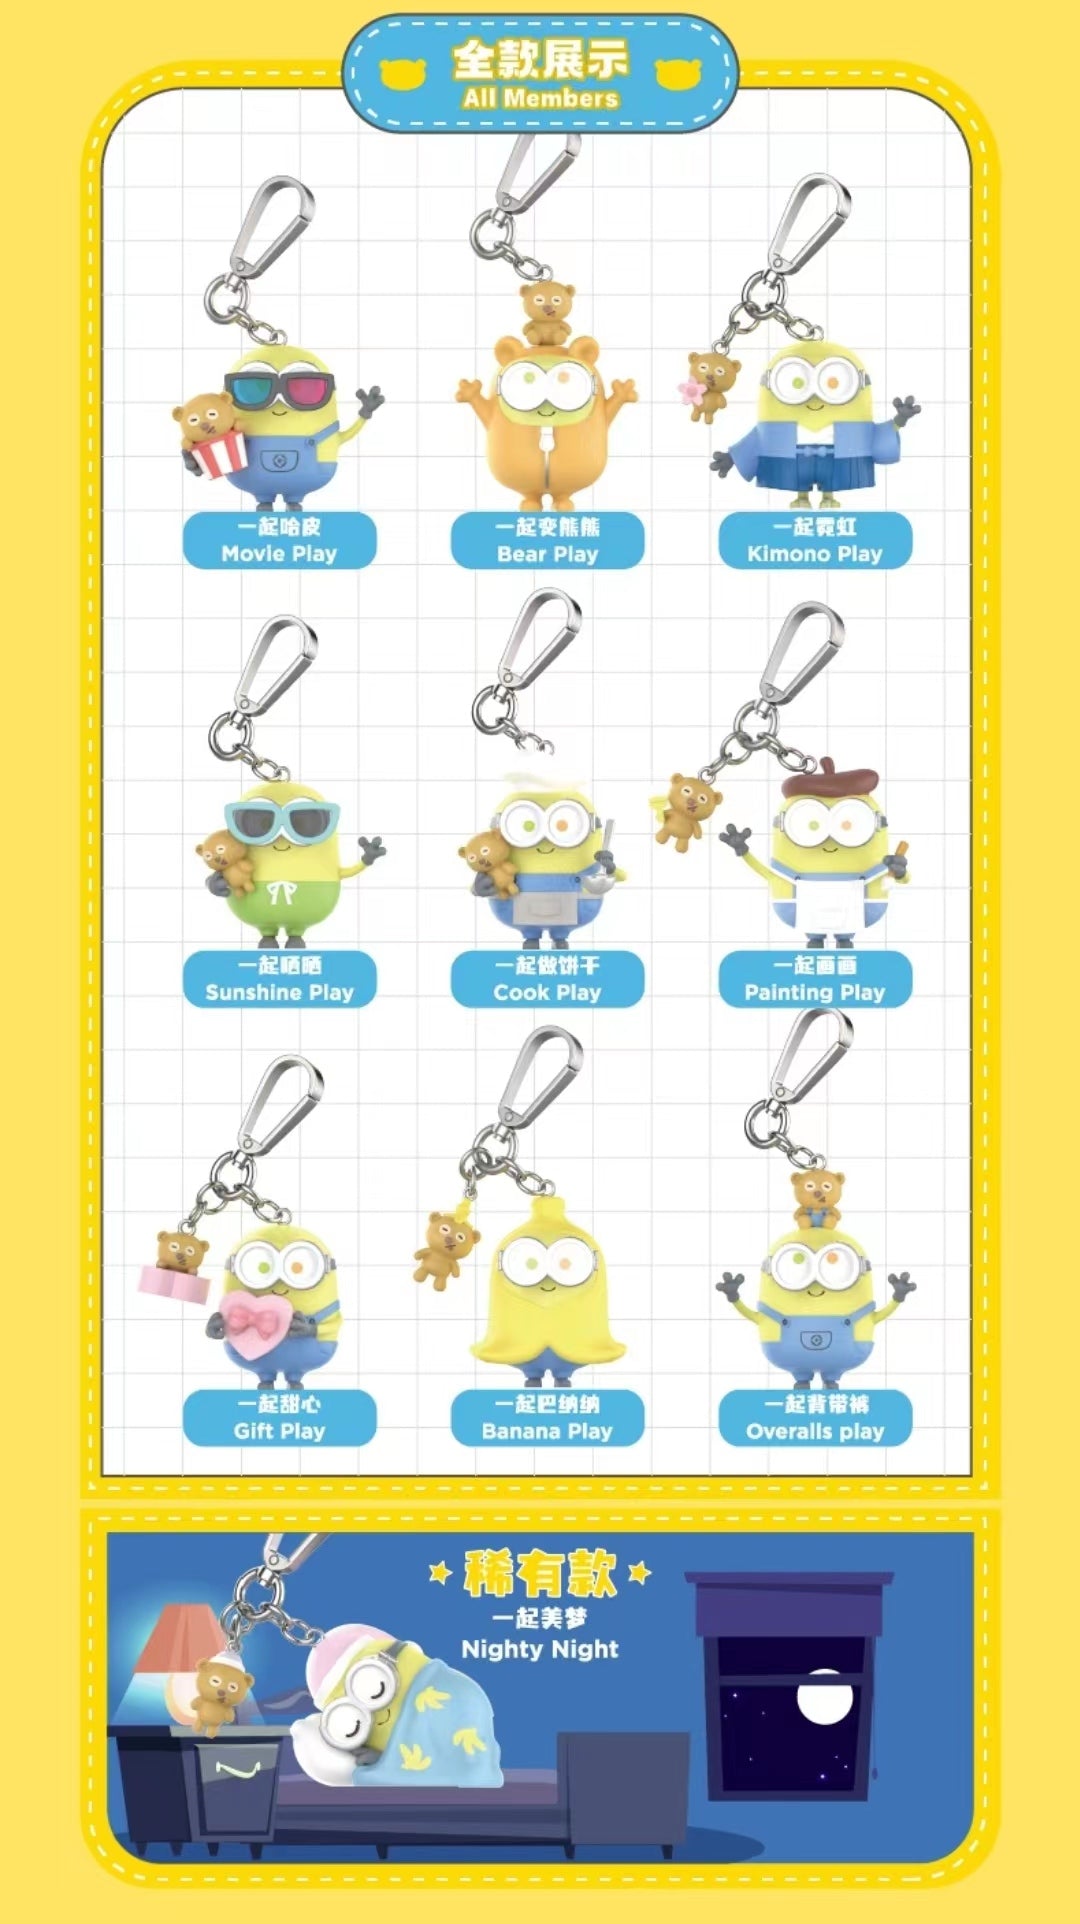 [TOPTOY] minions - Best Friend Forever Key Chain Blind Box